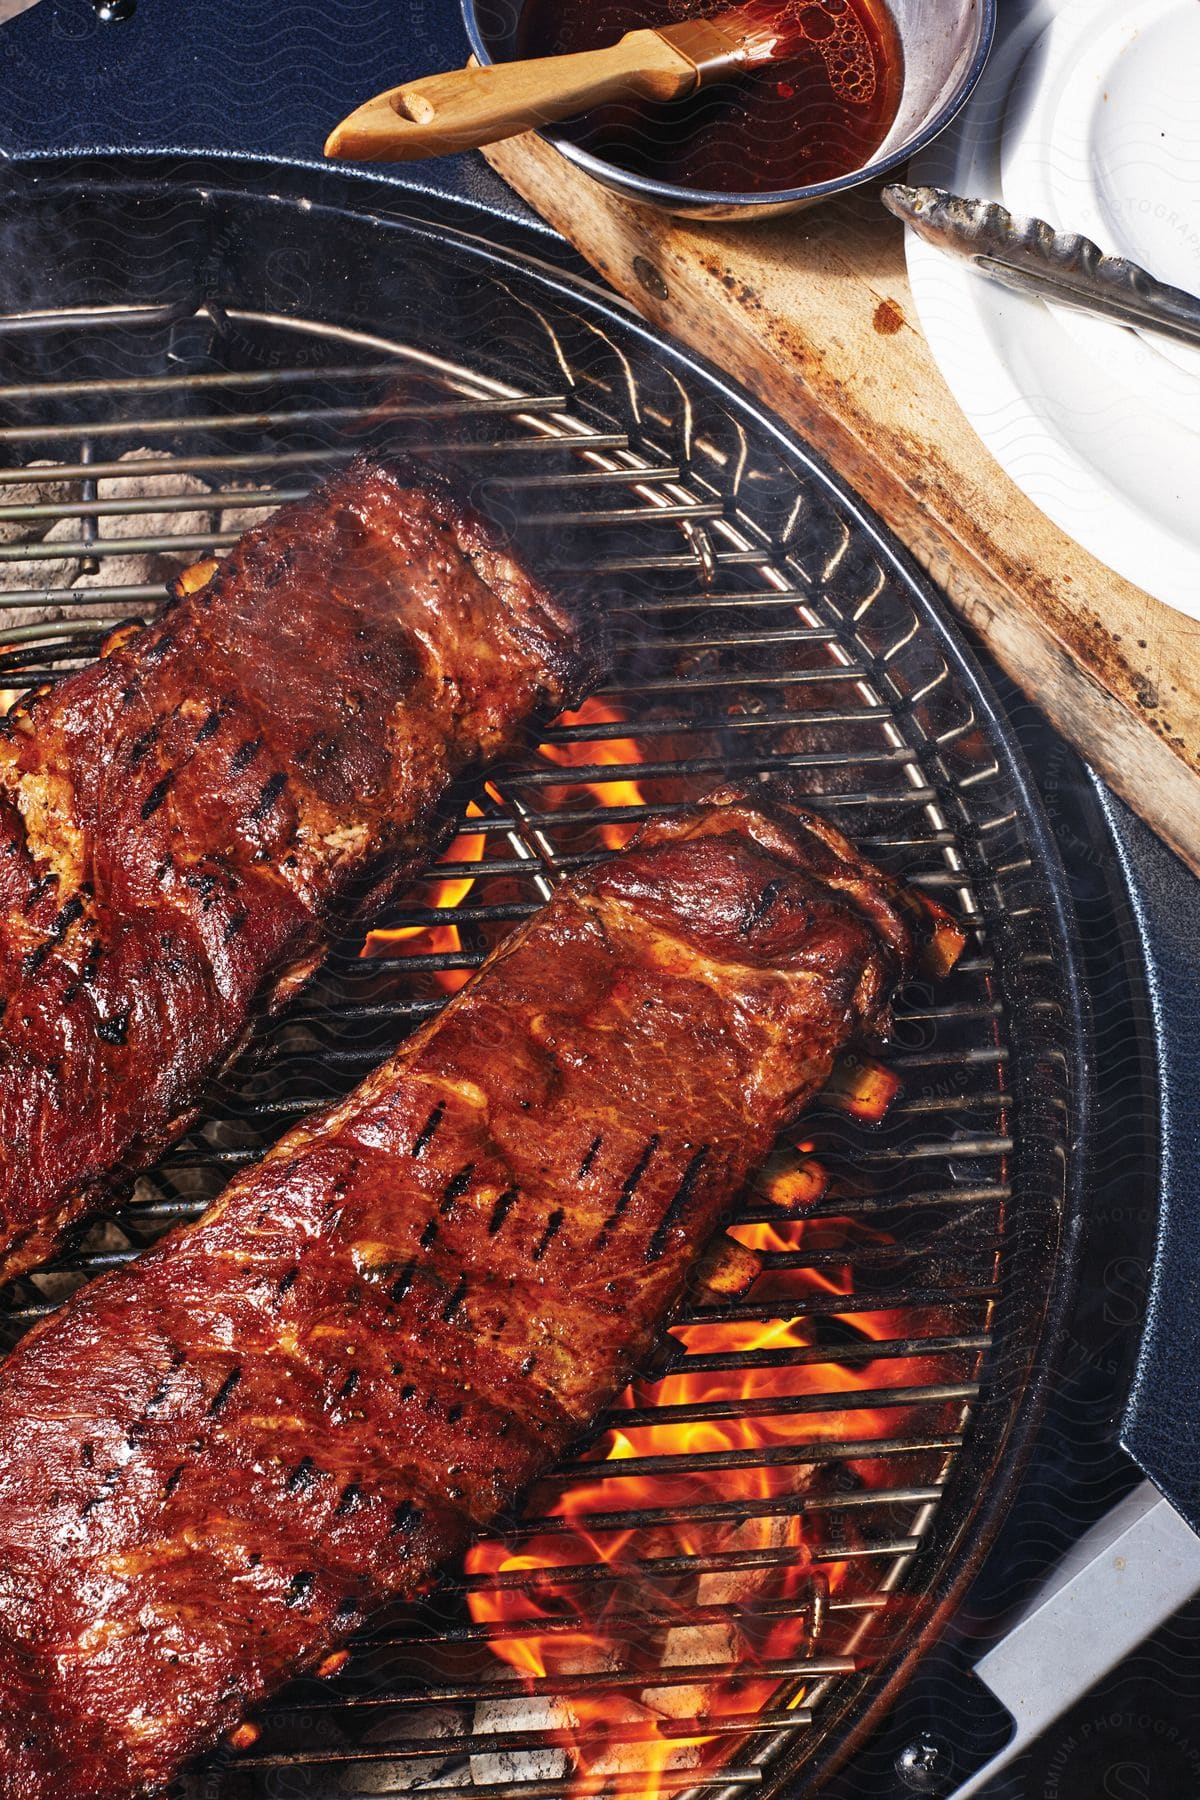 Grilling and cooking meat on a circular barbecue grill